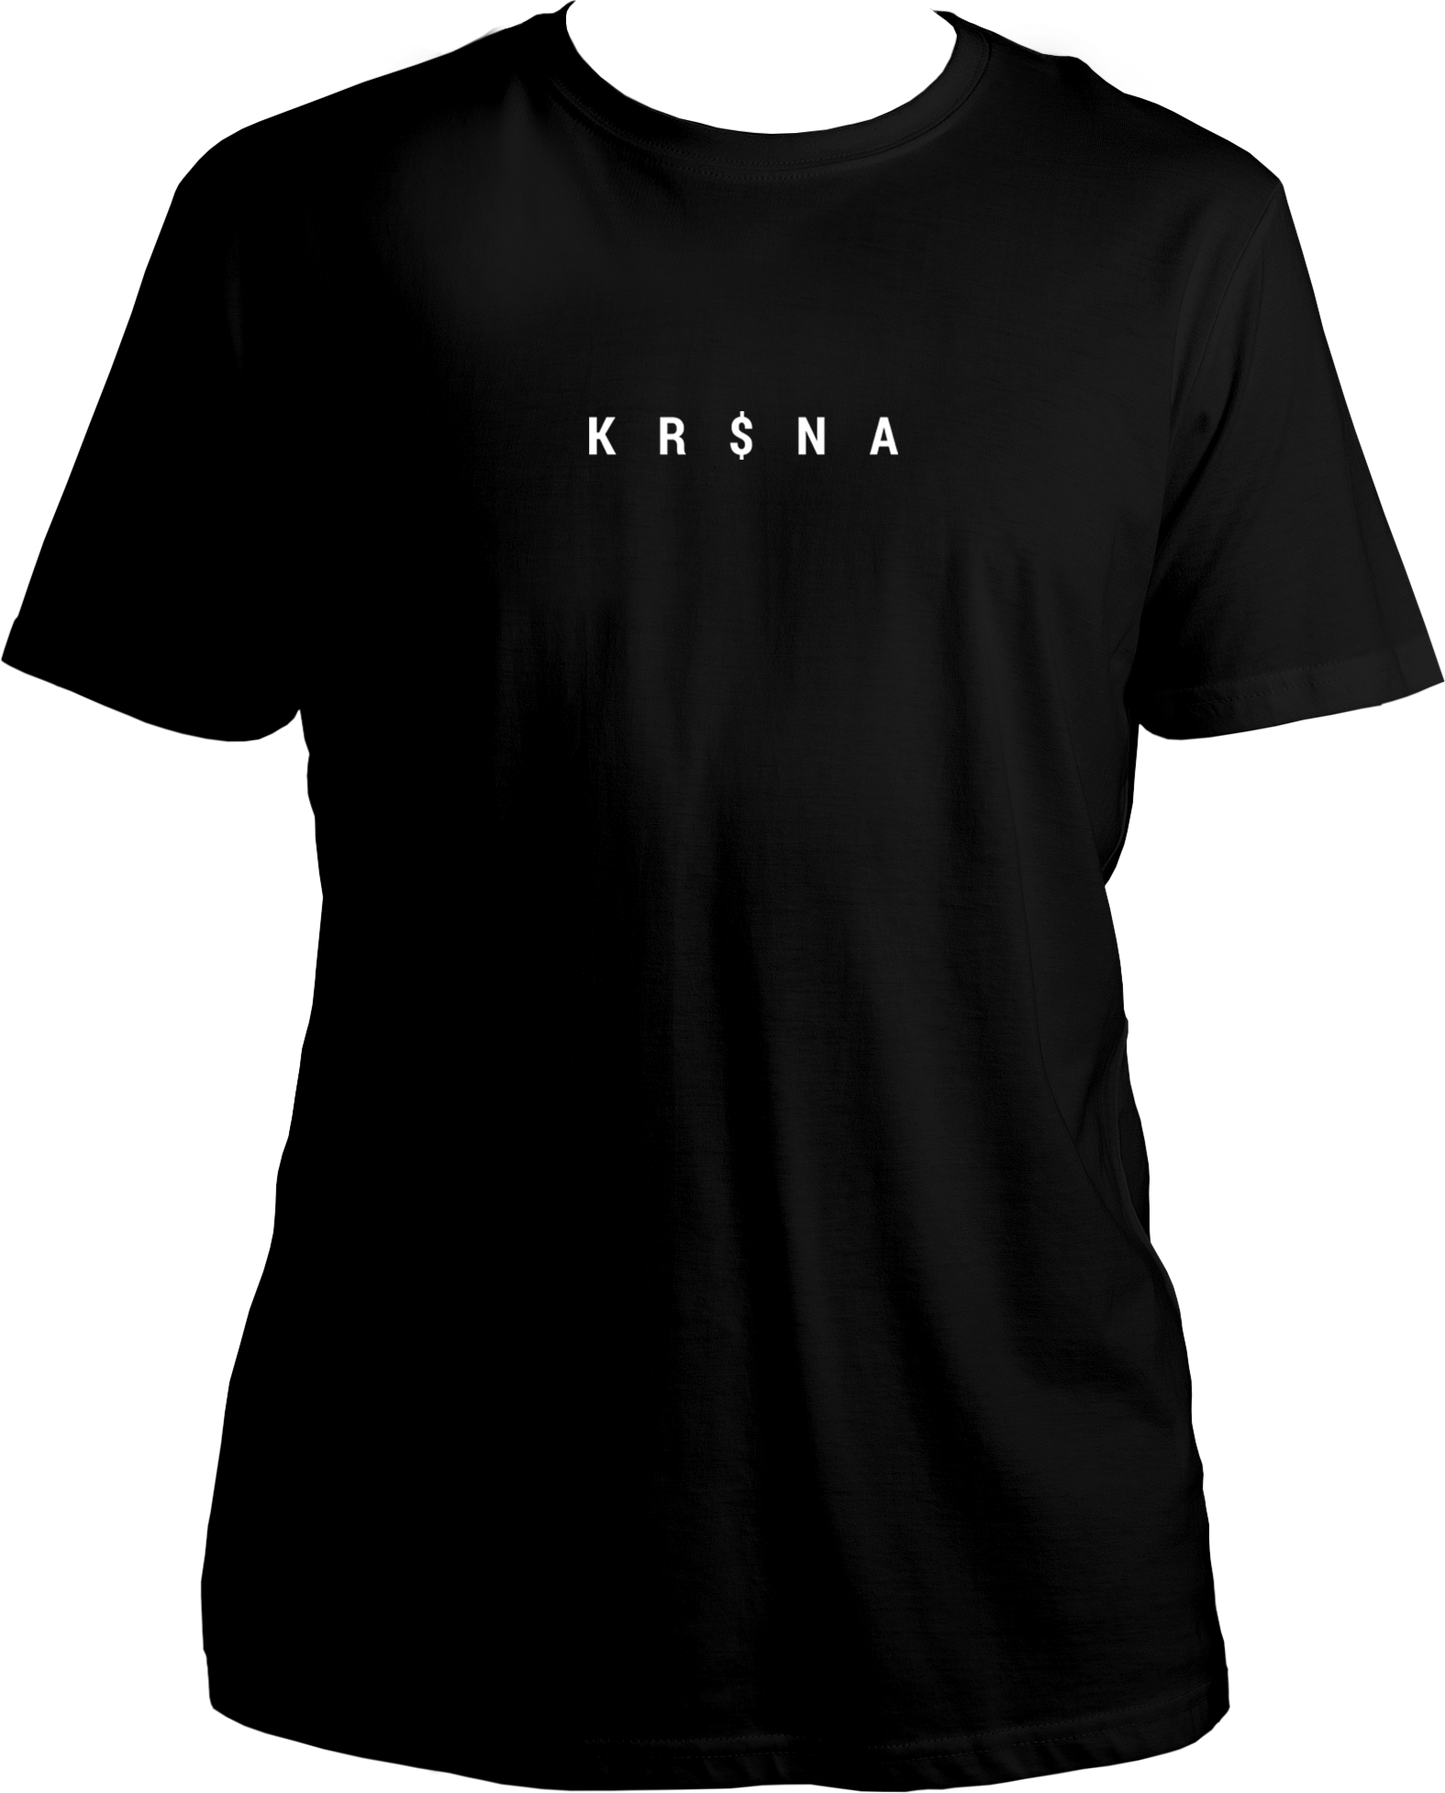 So, all you hip-hop heads, it’s time to elevate your wardrobe and rep your favorite artist. Whether you’re at a concert, chilling with friends, or just vibing solo, this tee is your go-to. Don’t miss out on this exclusive piece – shop now and let the world know you’re rolling with KR$NA.